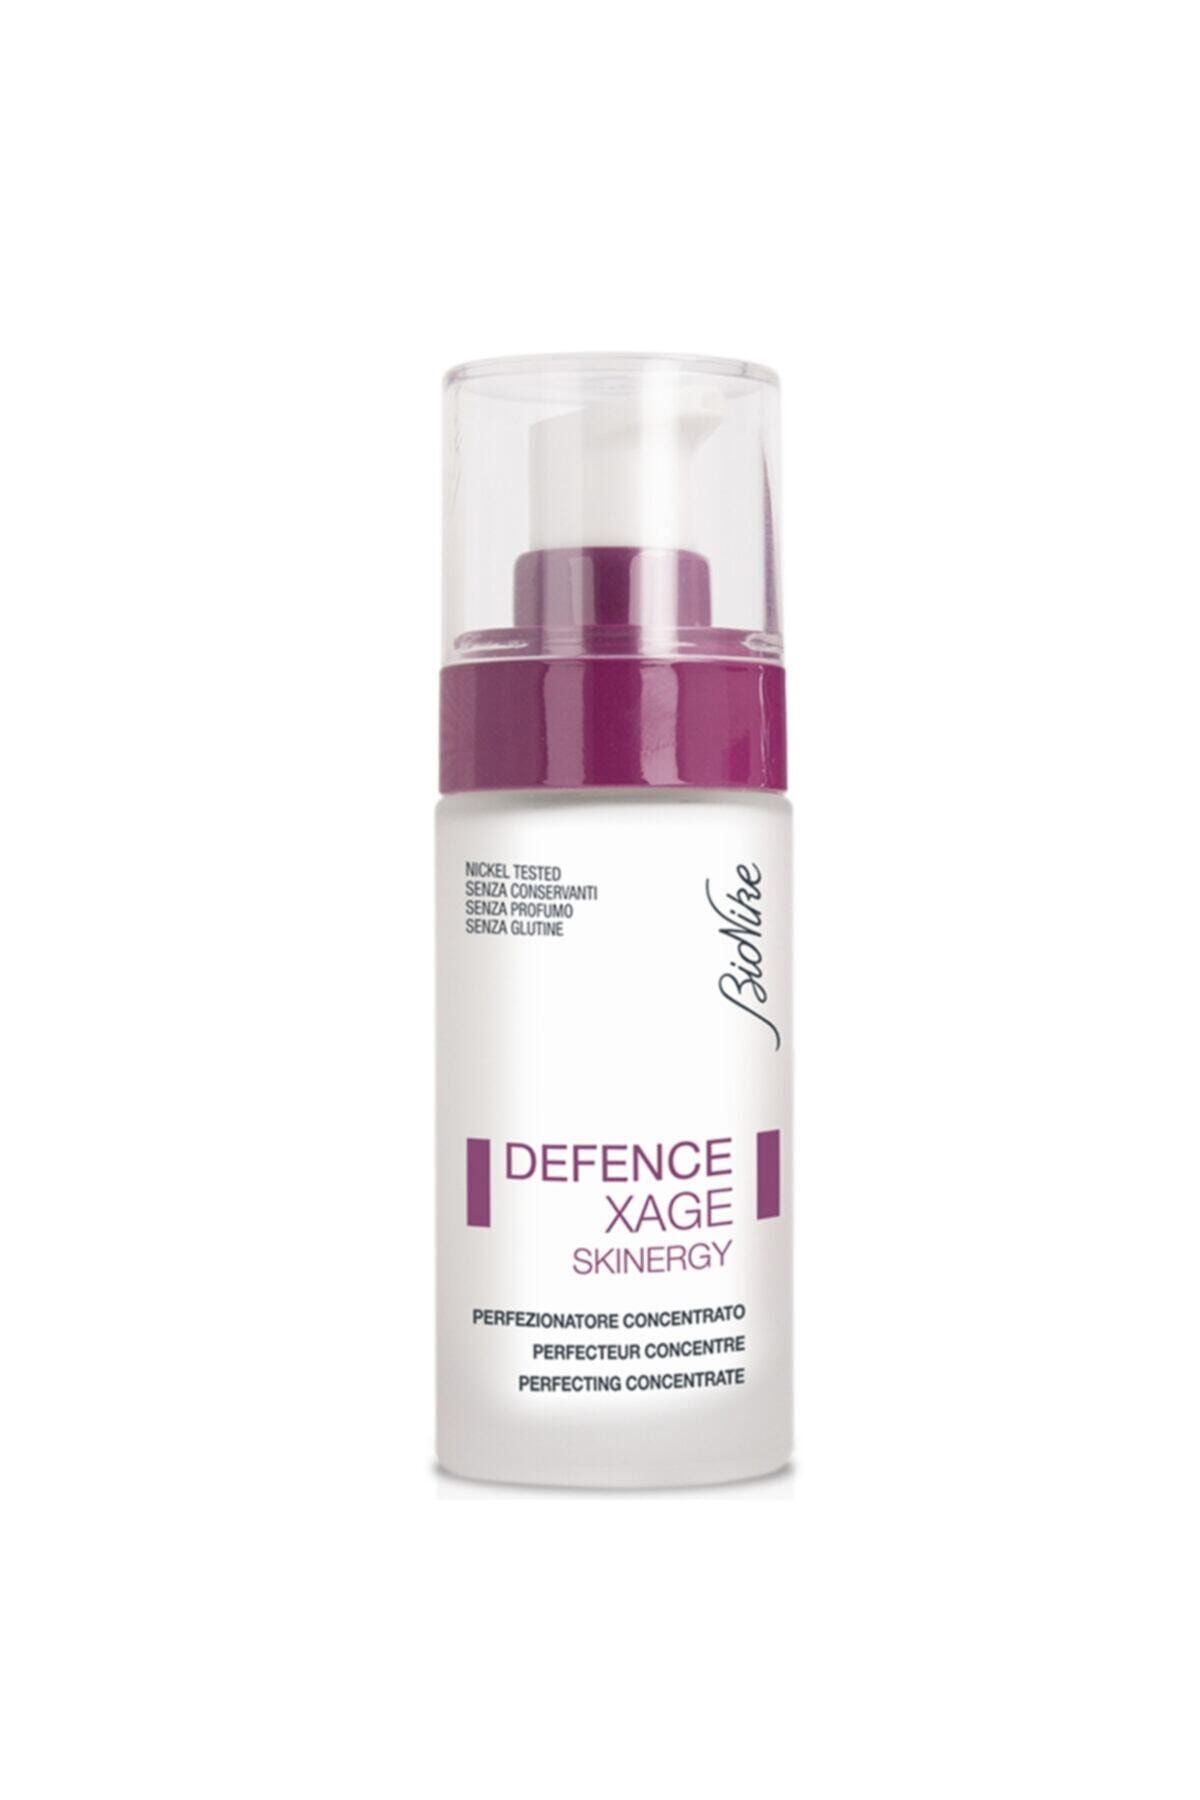 BioNike Defence Xage Skinergy Concentrate 30 ml